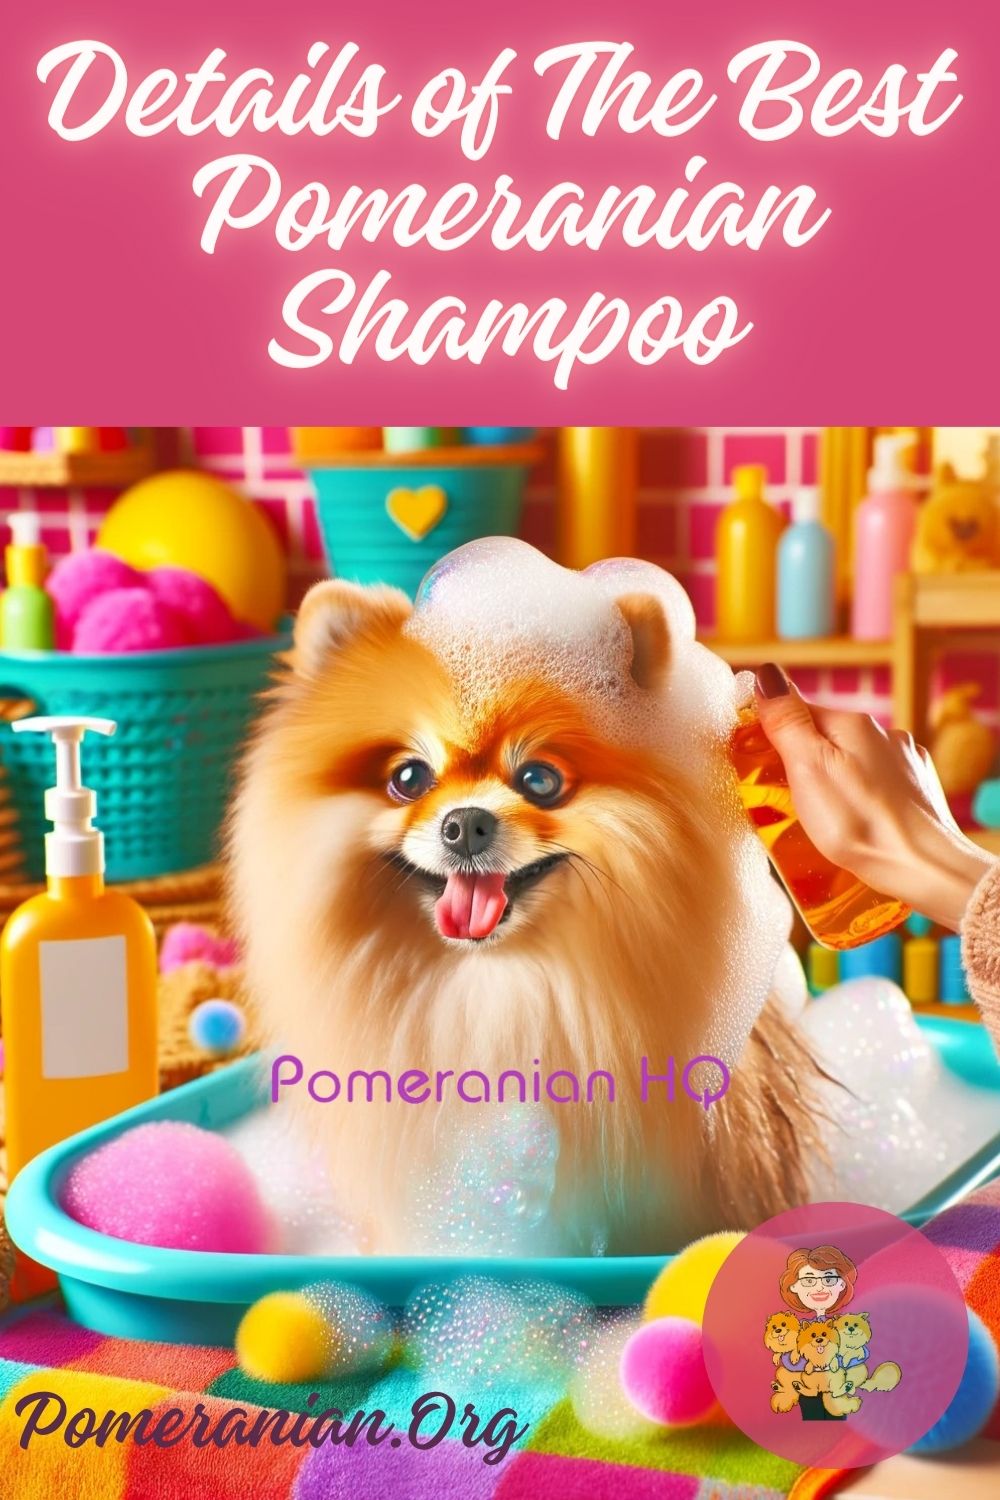 Details of The Best Shampoo for Pomeranian Dogs